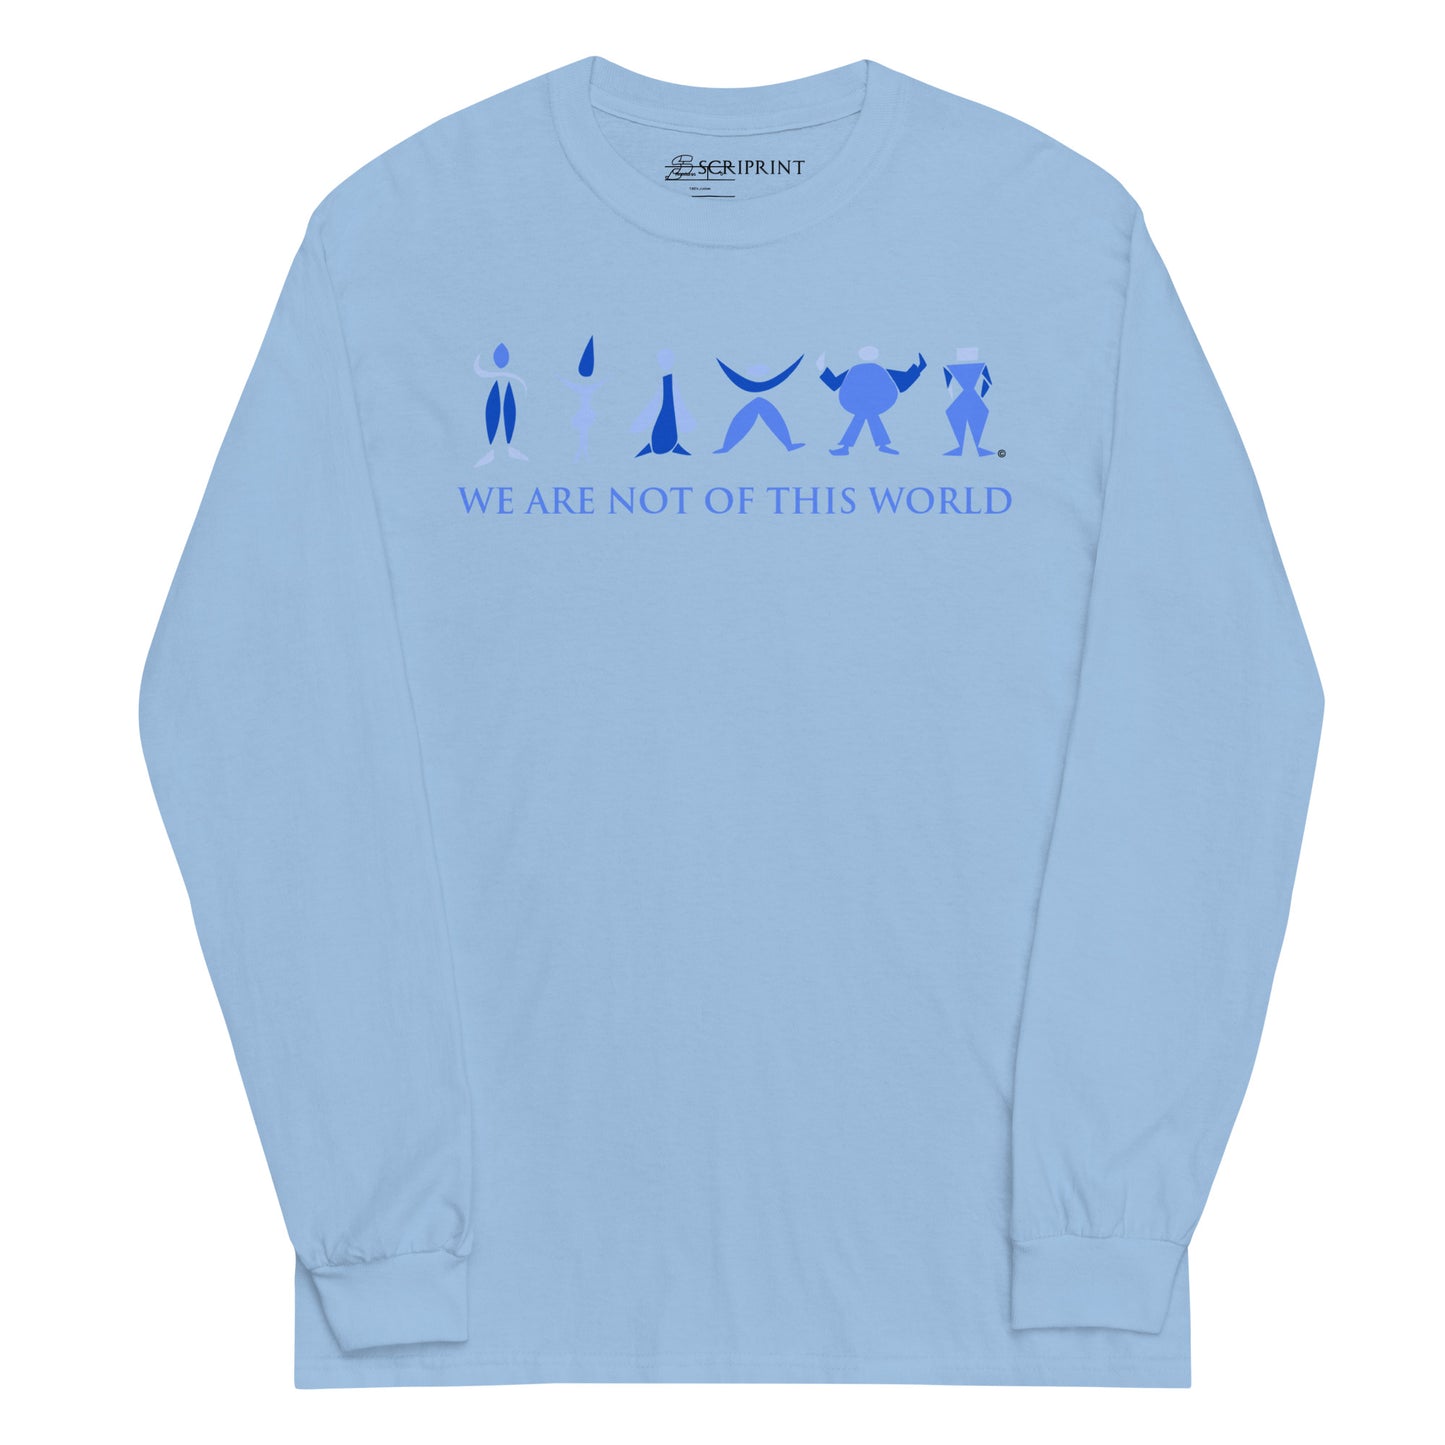 We Are Not of This World Men’s Long Sleeve Shirt